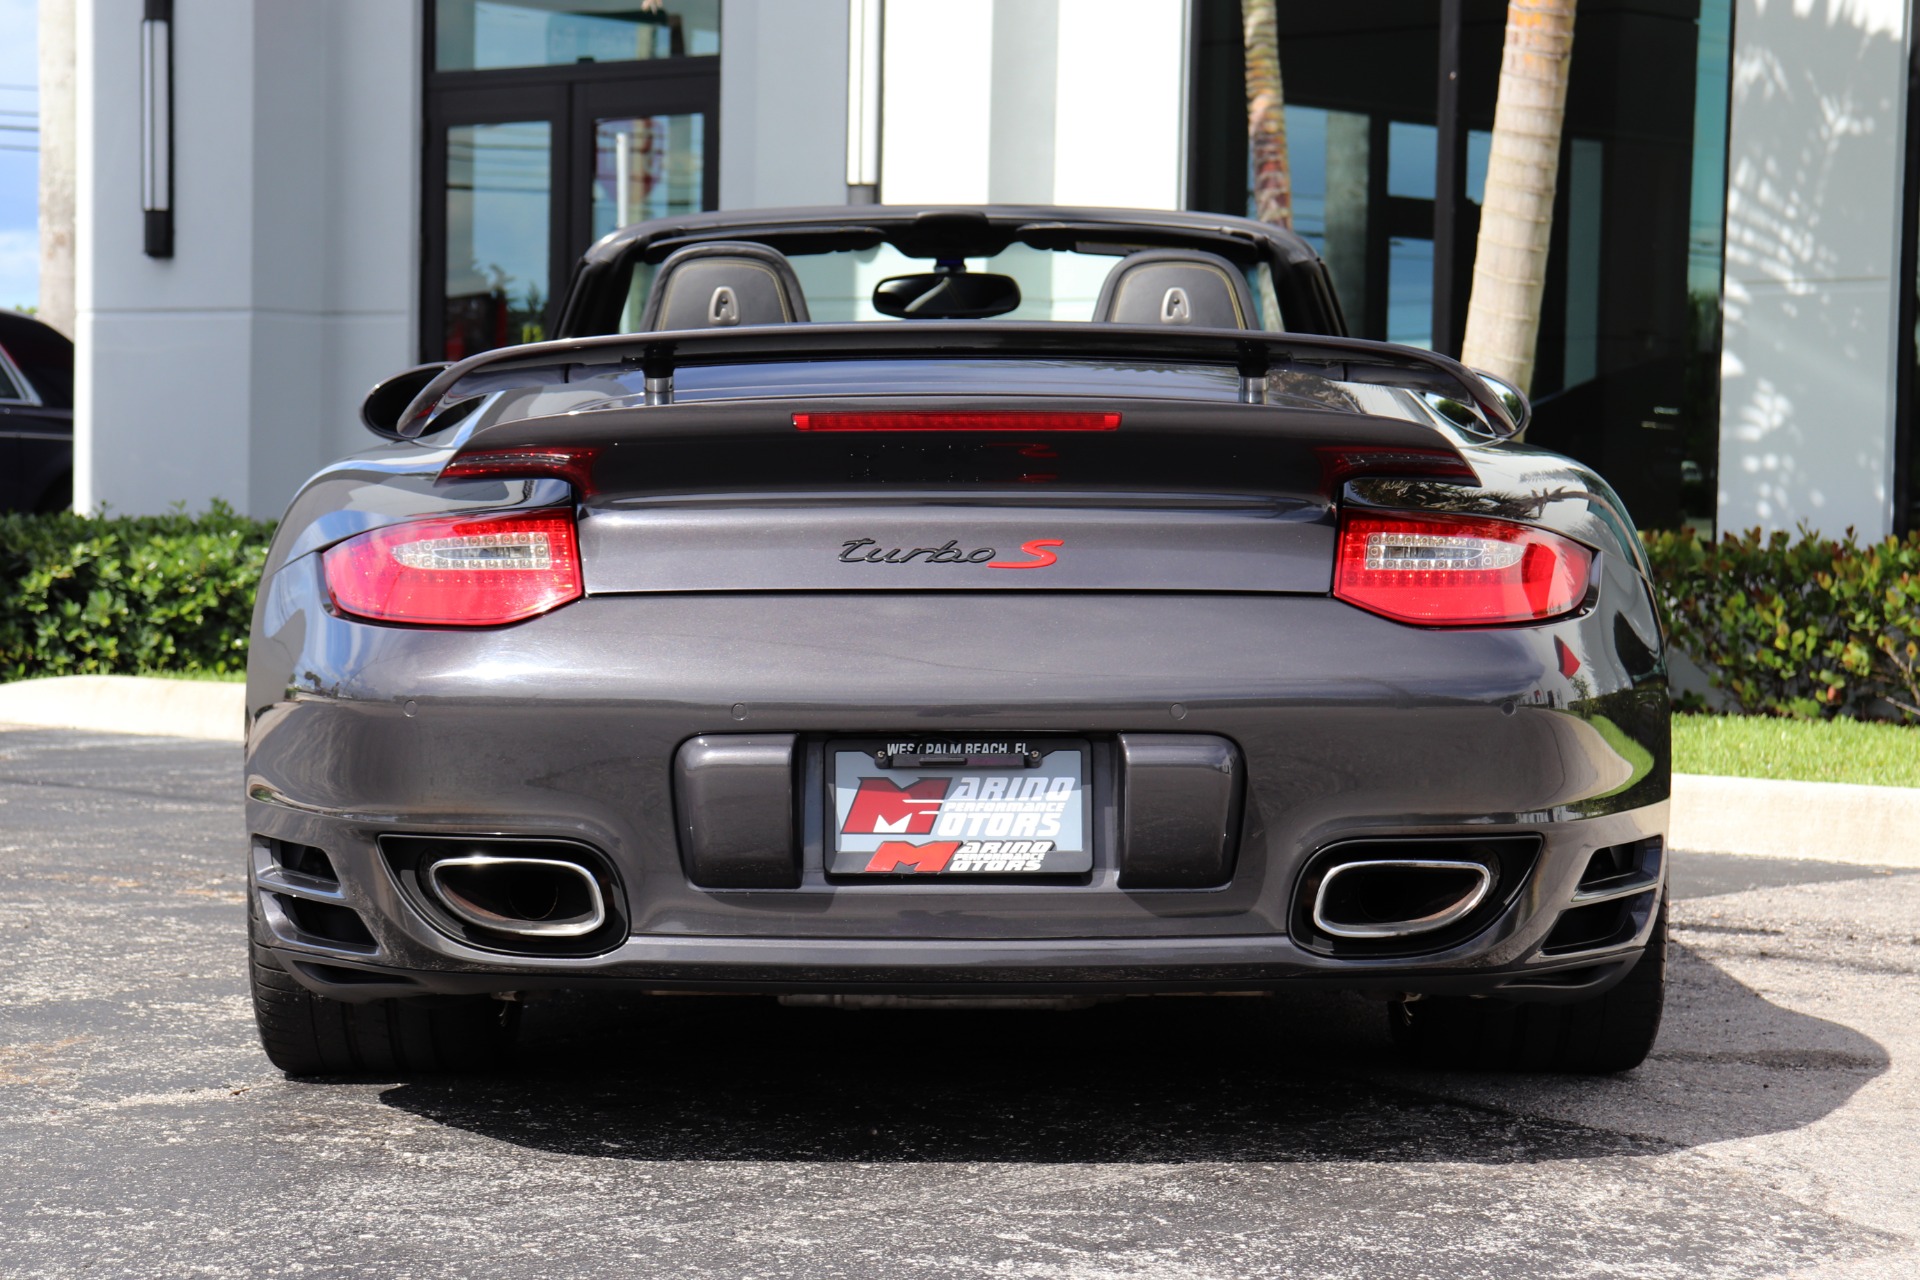 Used 2011 Porsche 911 Turbo S Cabriolet For Sale (119,900